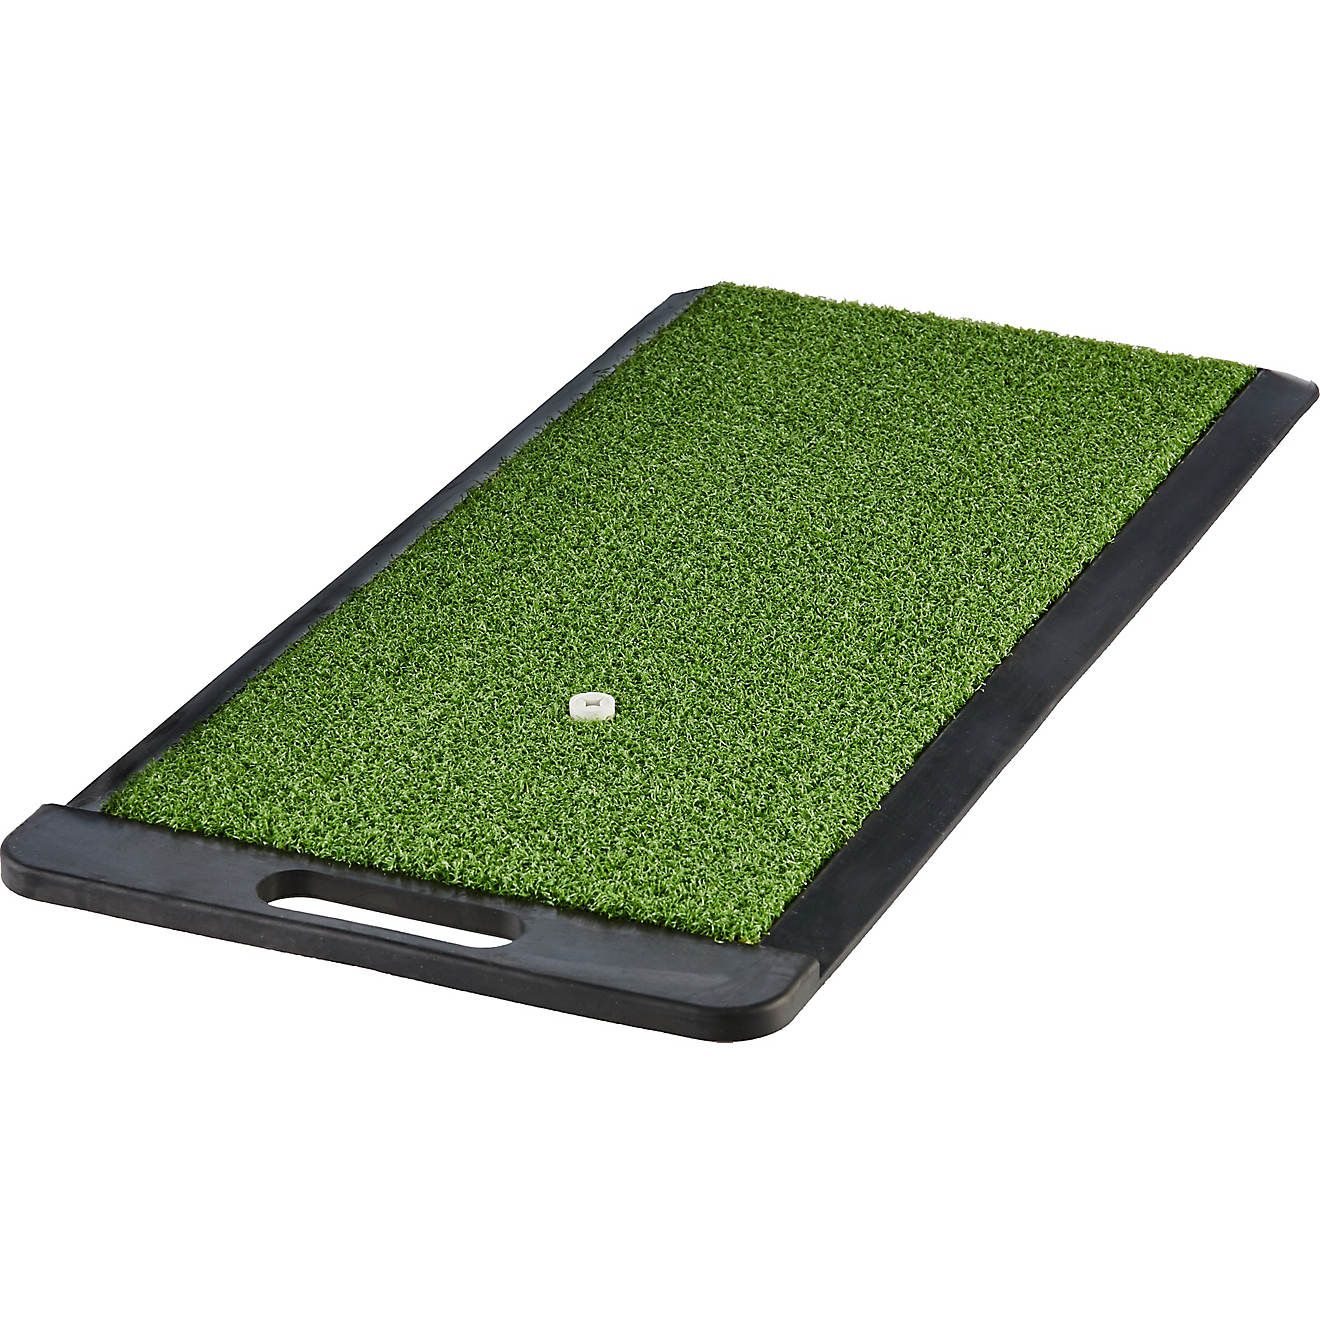 Tour Motion Golf Mat with Handle | Academy | Academy Sports + Outdoors